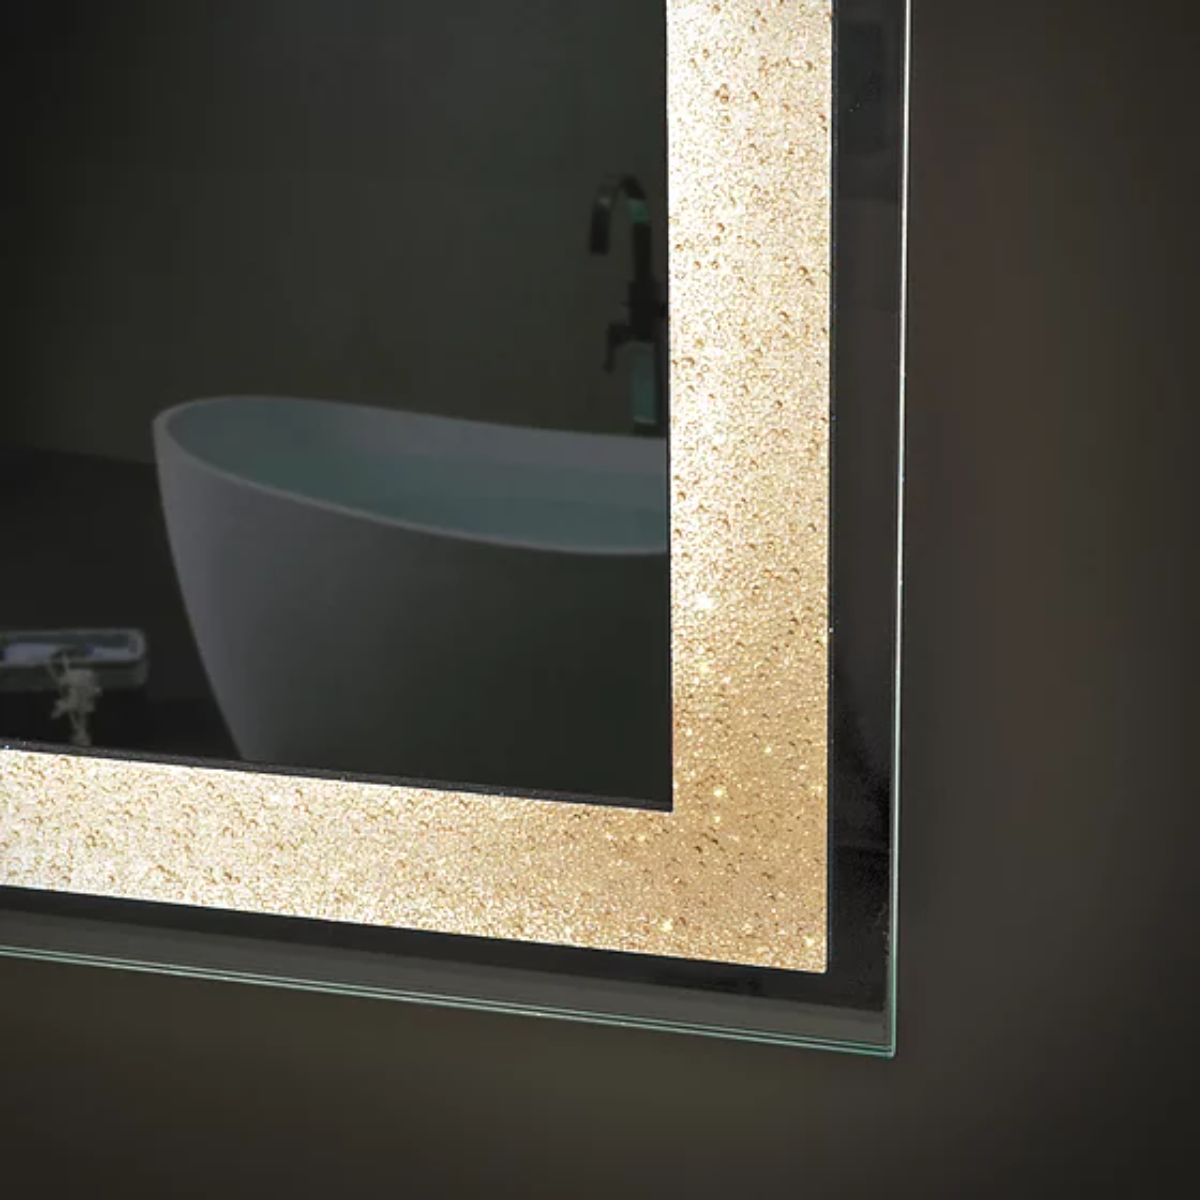 Edison Crystal 12 in. x 16 in. LED Wall Mirror with Touch On/Off Dimmer Function